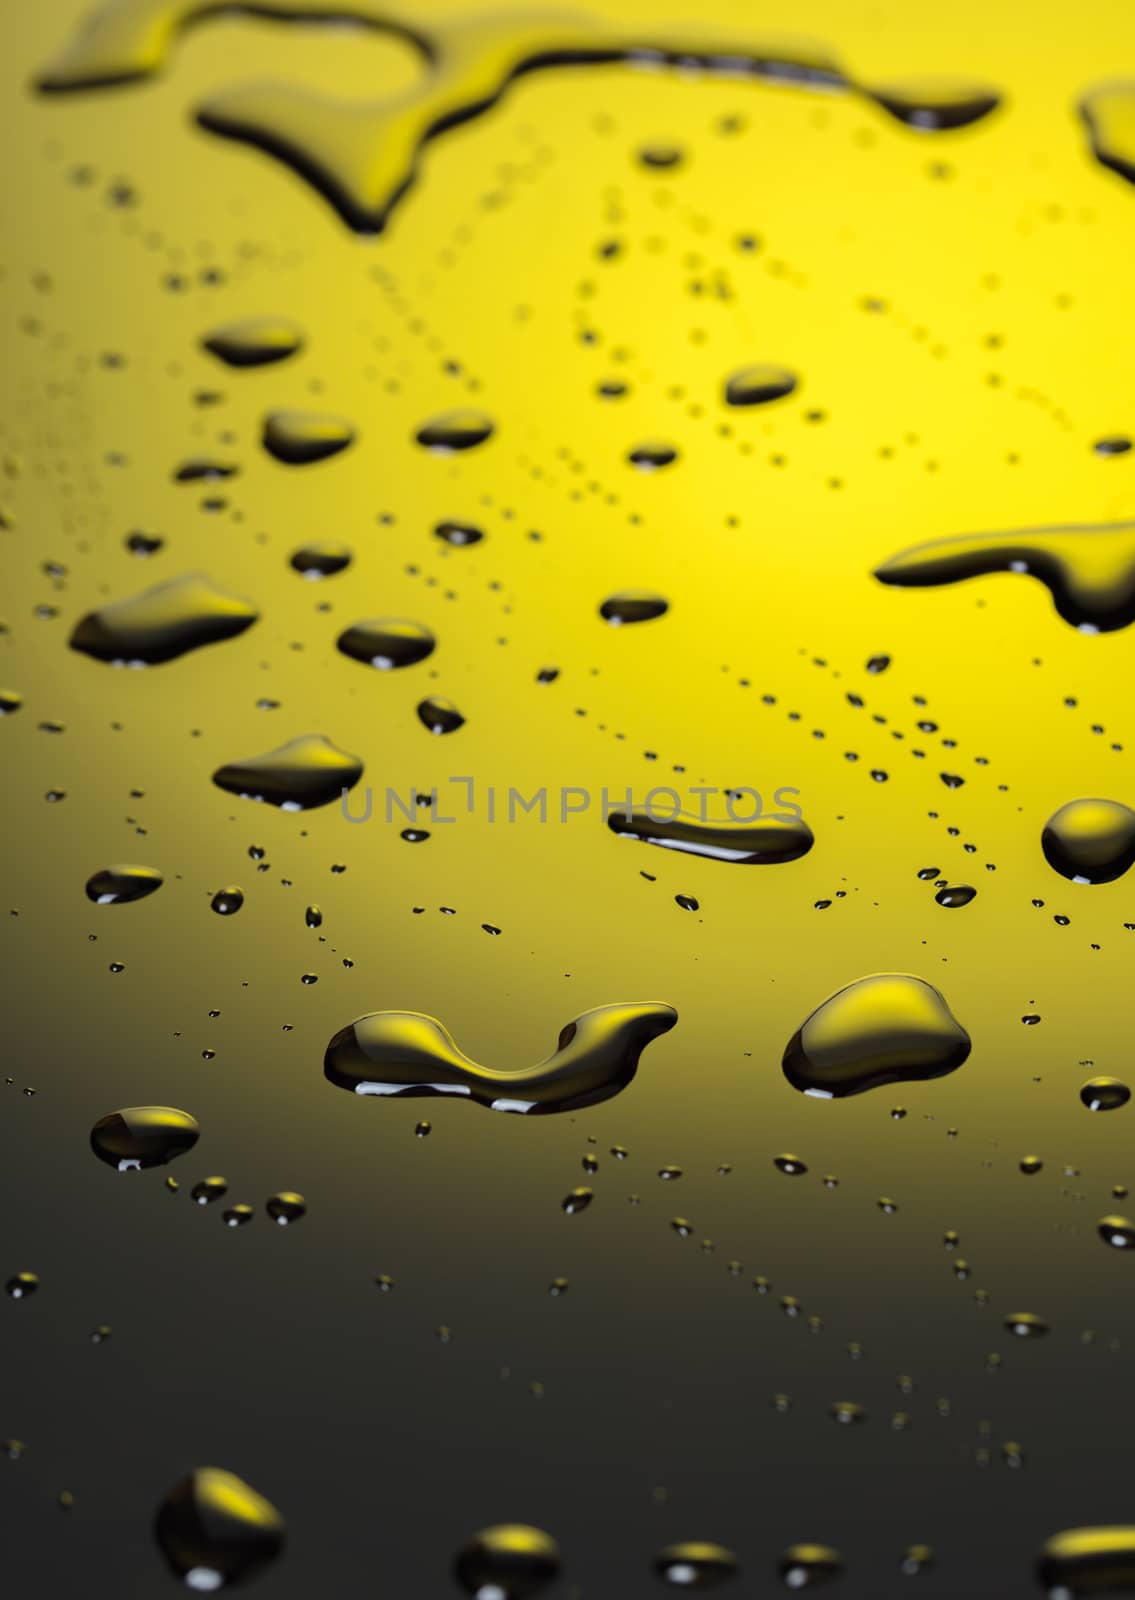 water droplets on black-and-yellow plastic by MegaArt